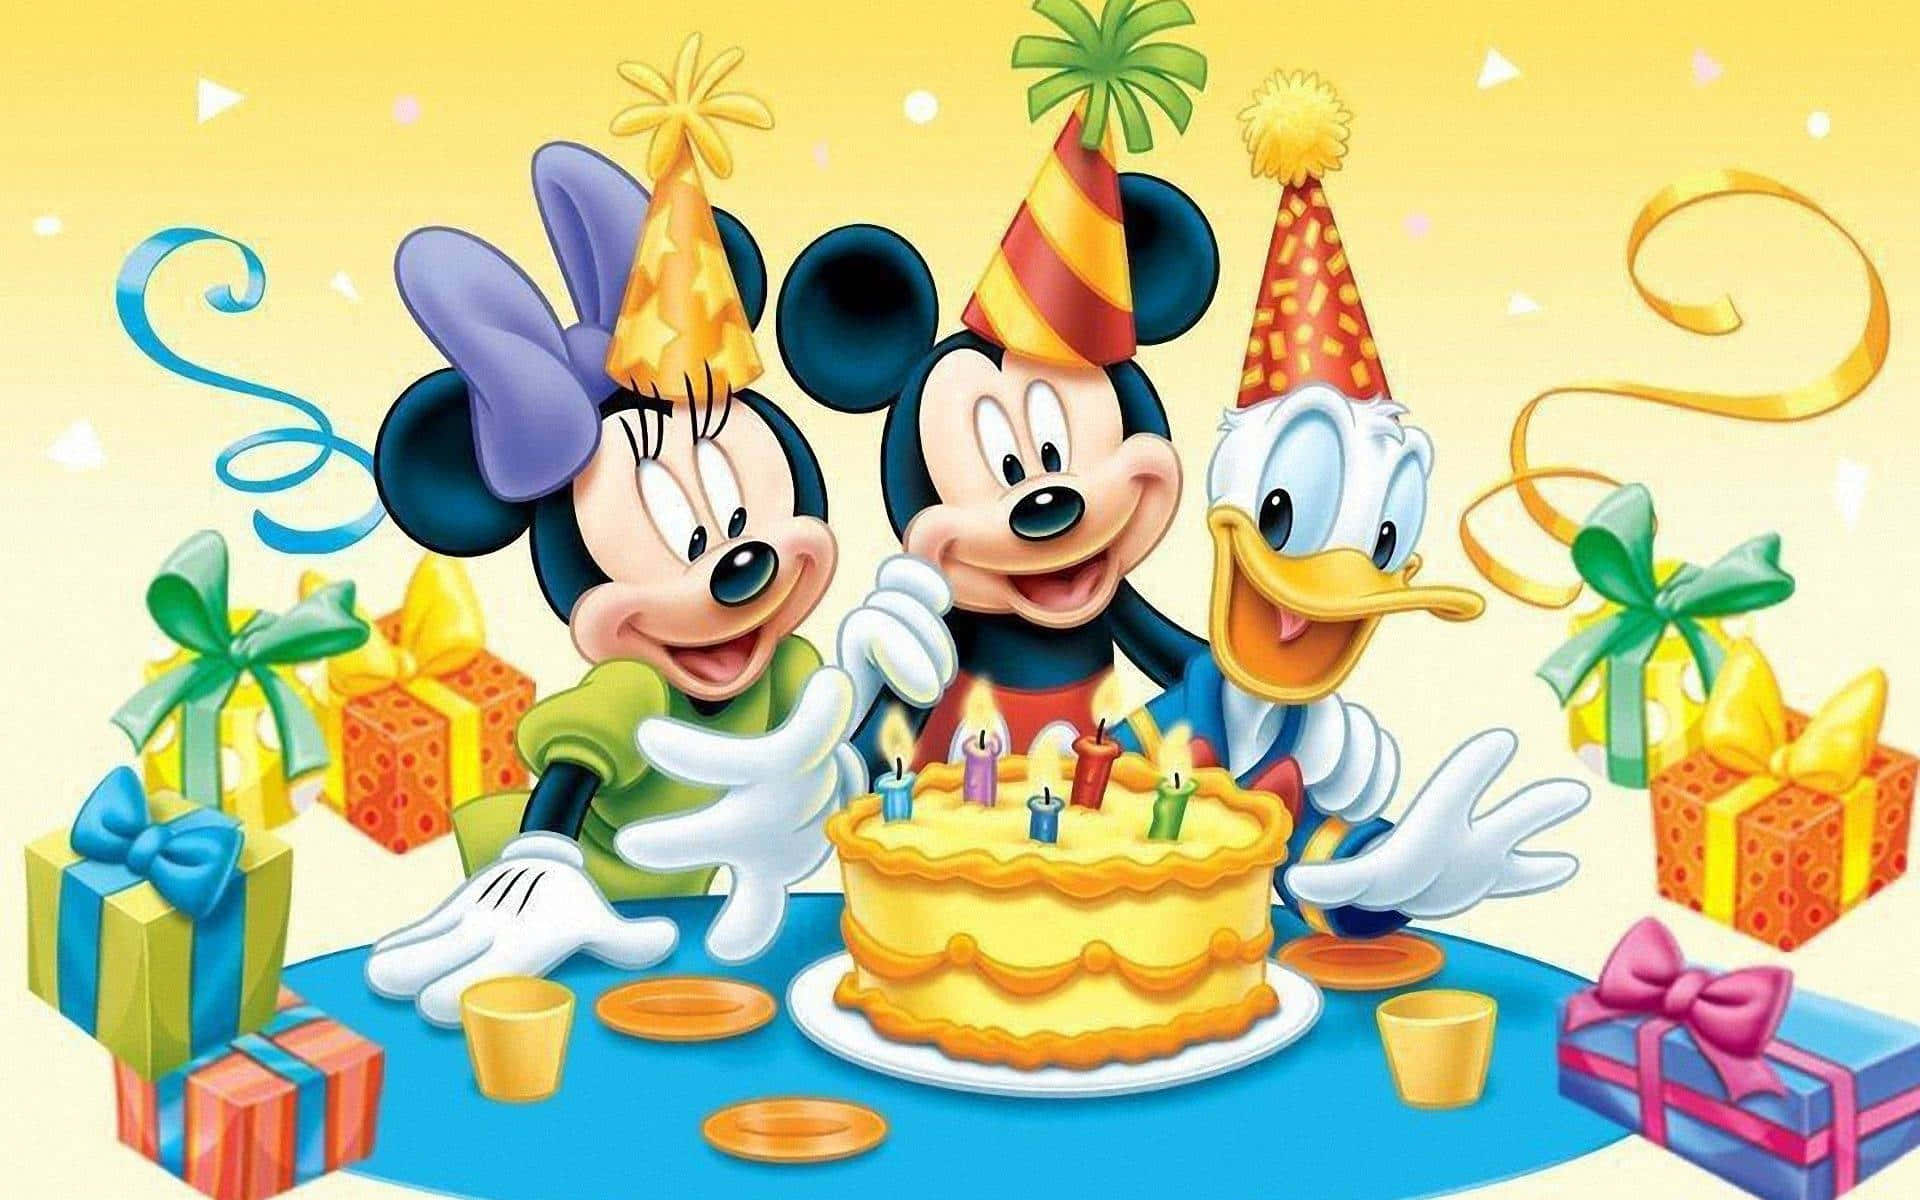 Join Mickey, Donald and Goofy on Their Adventures in the Magical Mickey Mouse Clubhouse